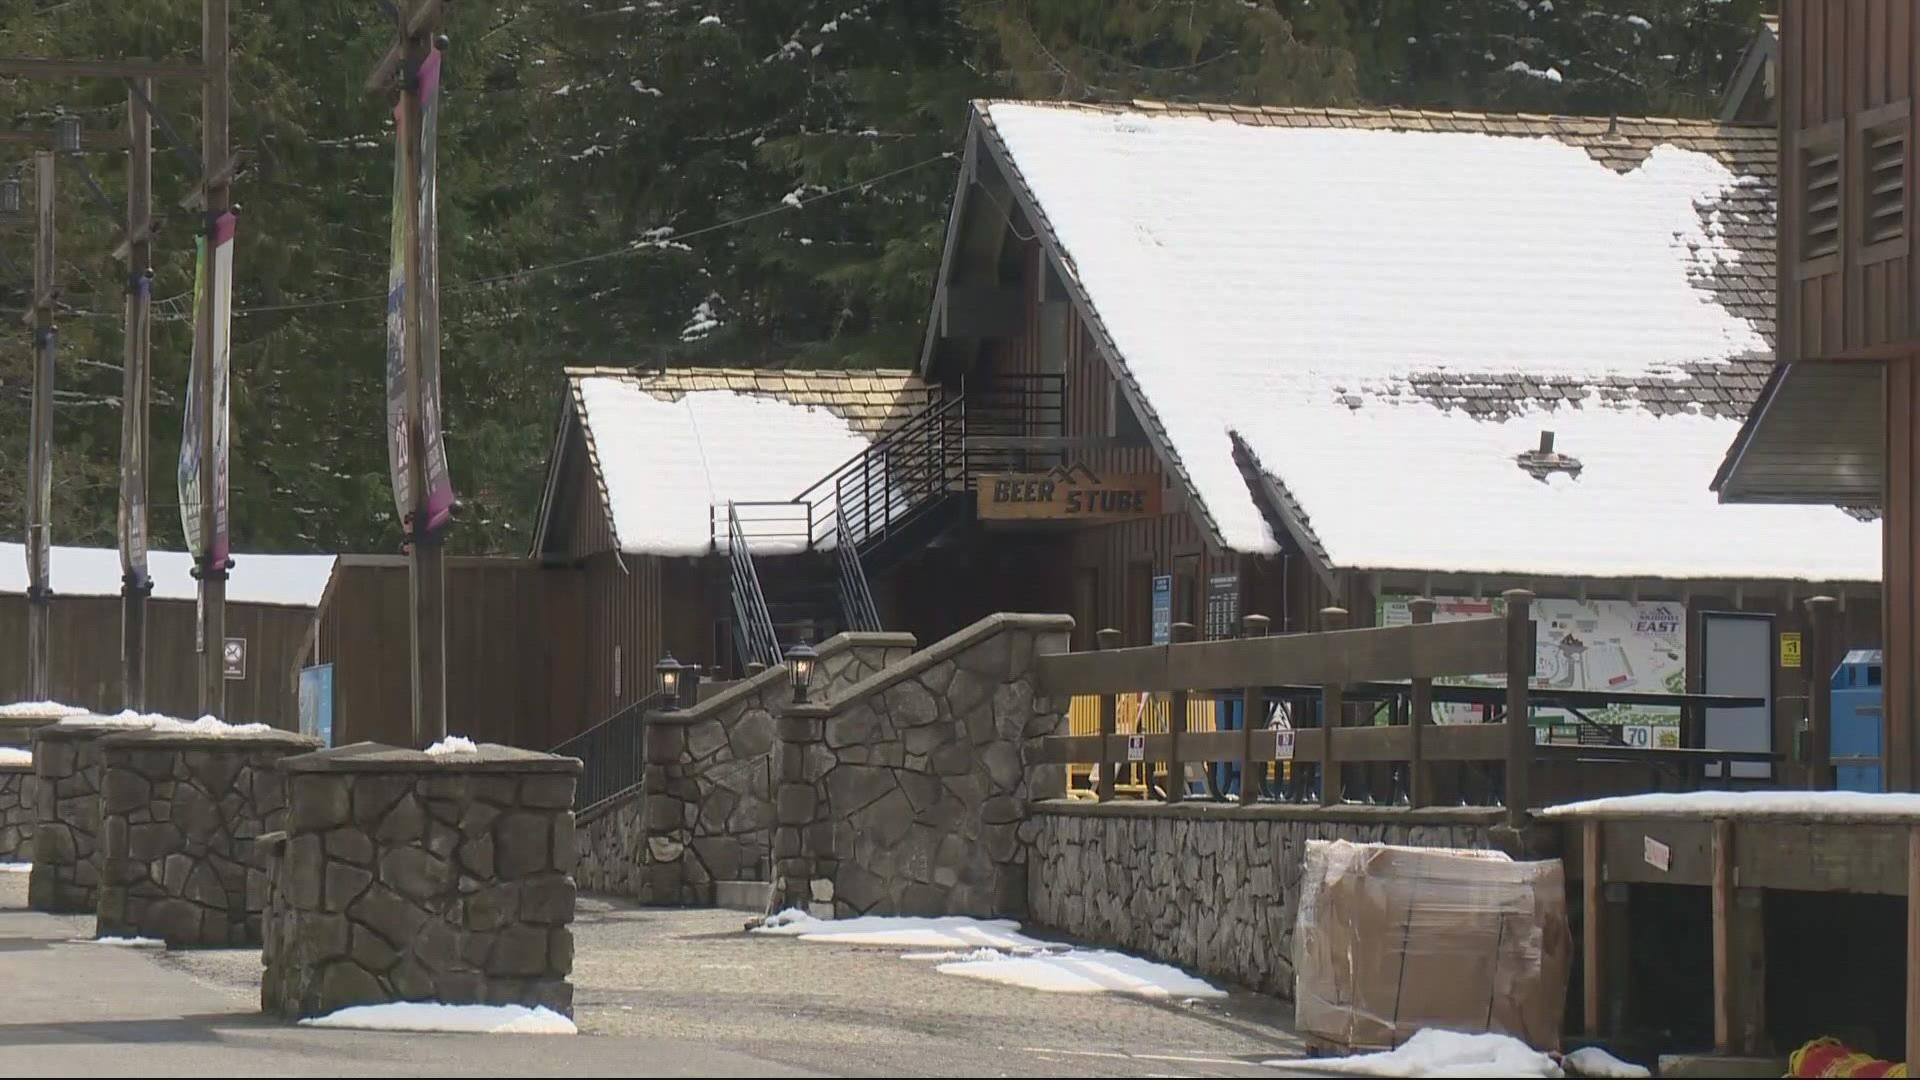 Mount Hood Skibowl will be off limits to mountain bikers this summer. The decision comes after the resort lost a lawsuit to a man who became paralyzed in a crash.